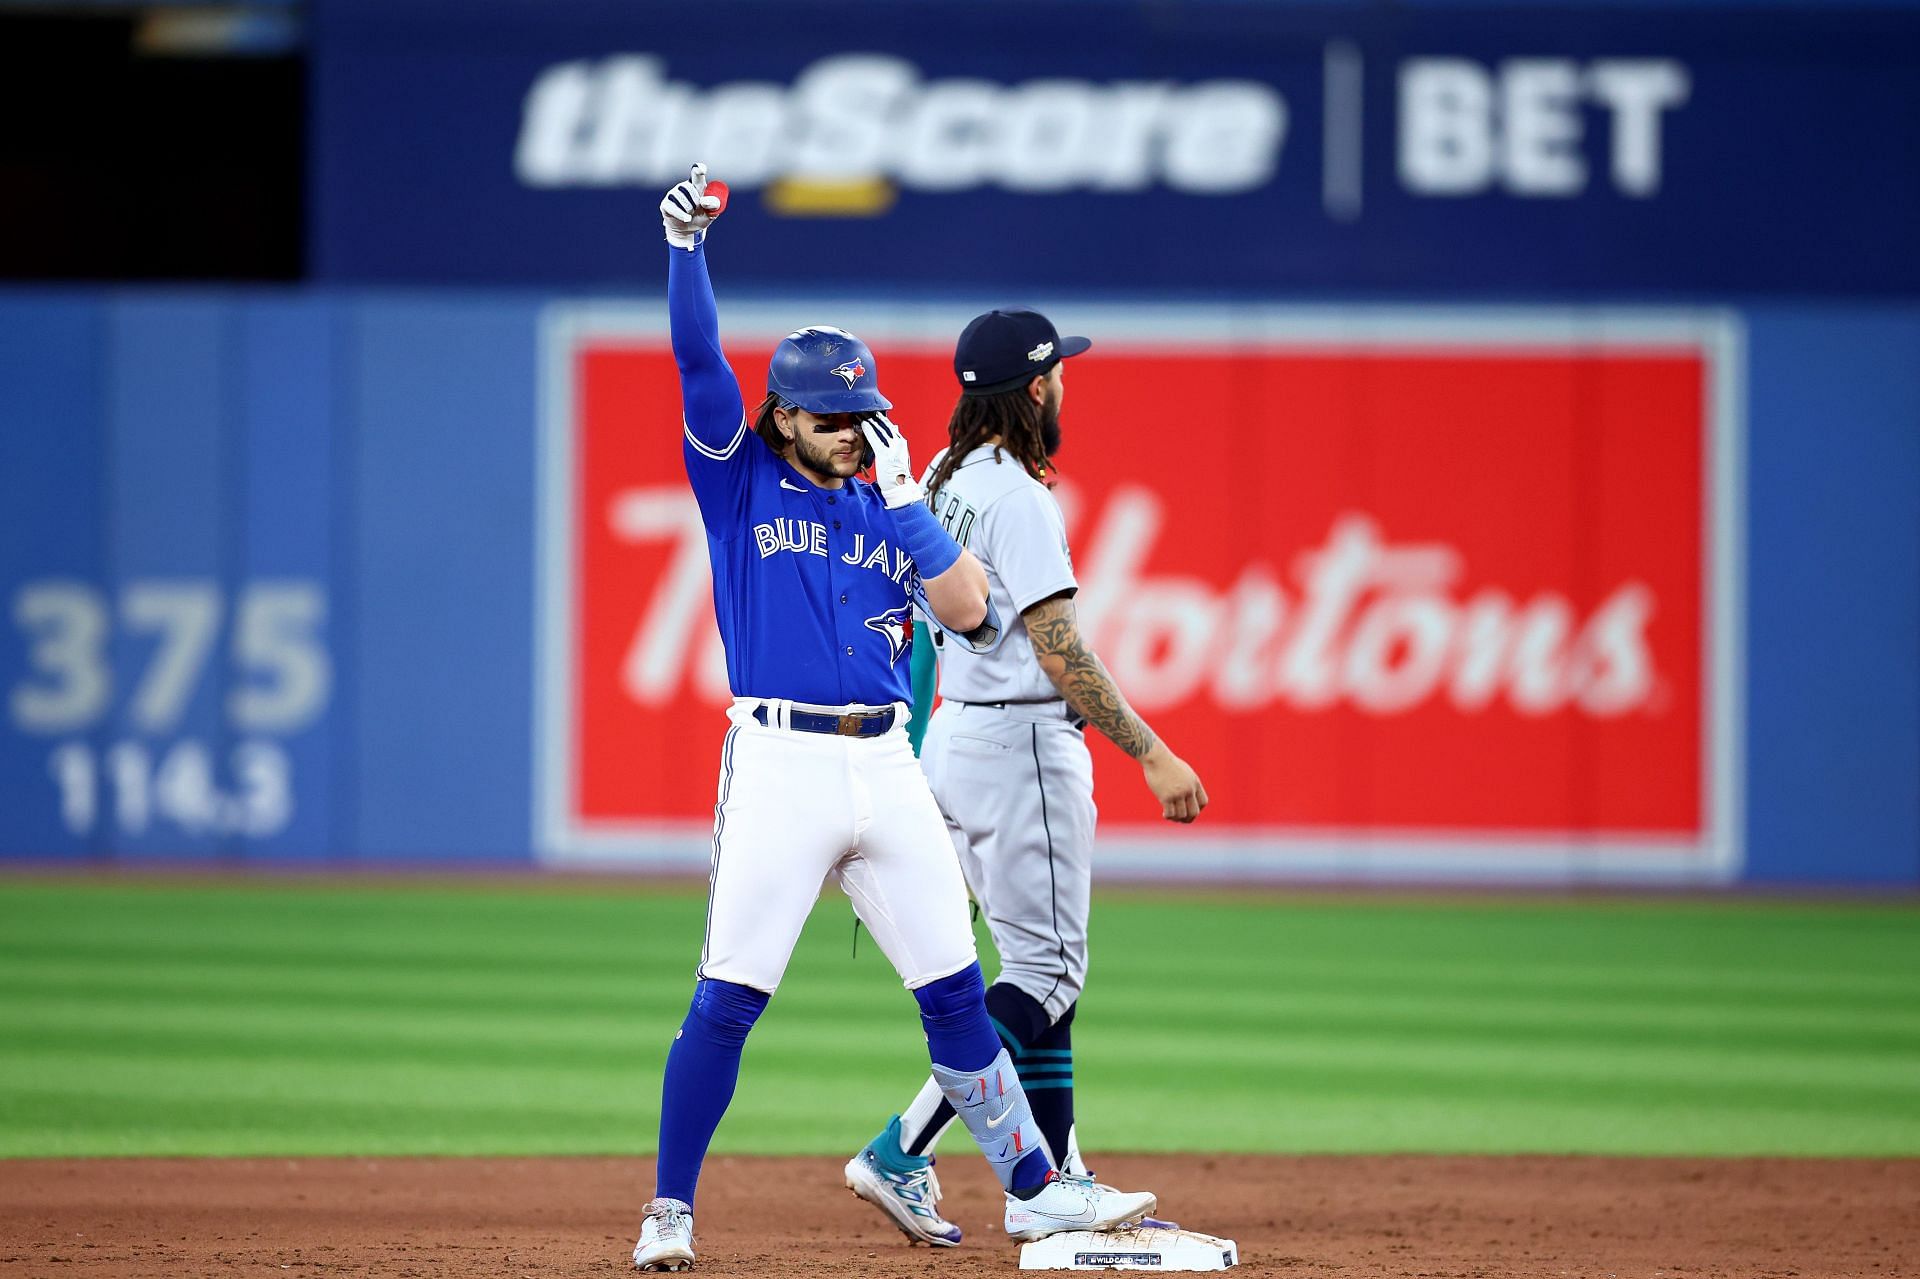 Bo Bichette to play in All Star Game just like father Dante